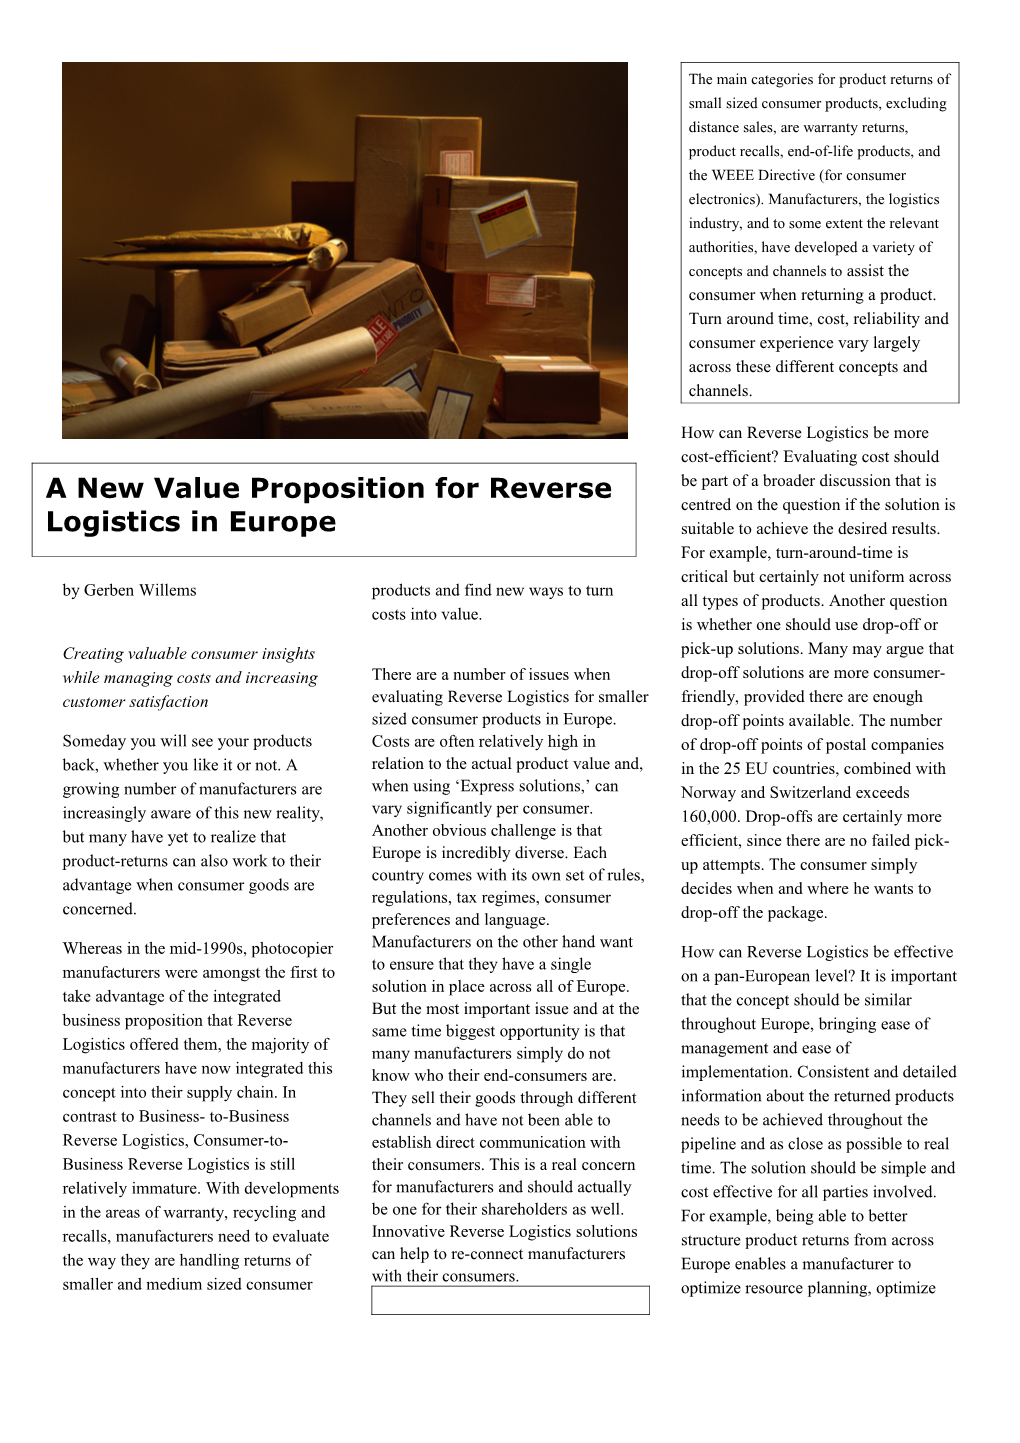 Turning Costs Into Value with Innovative Reverse Logistics